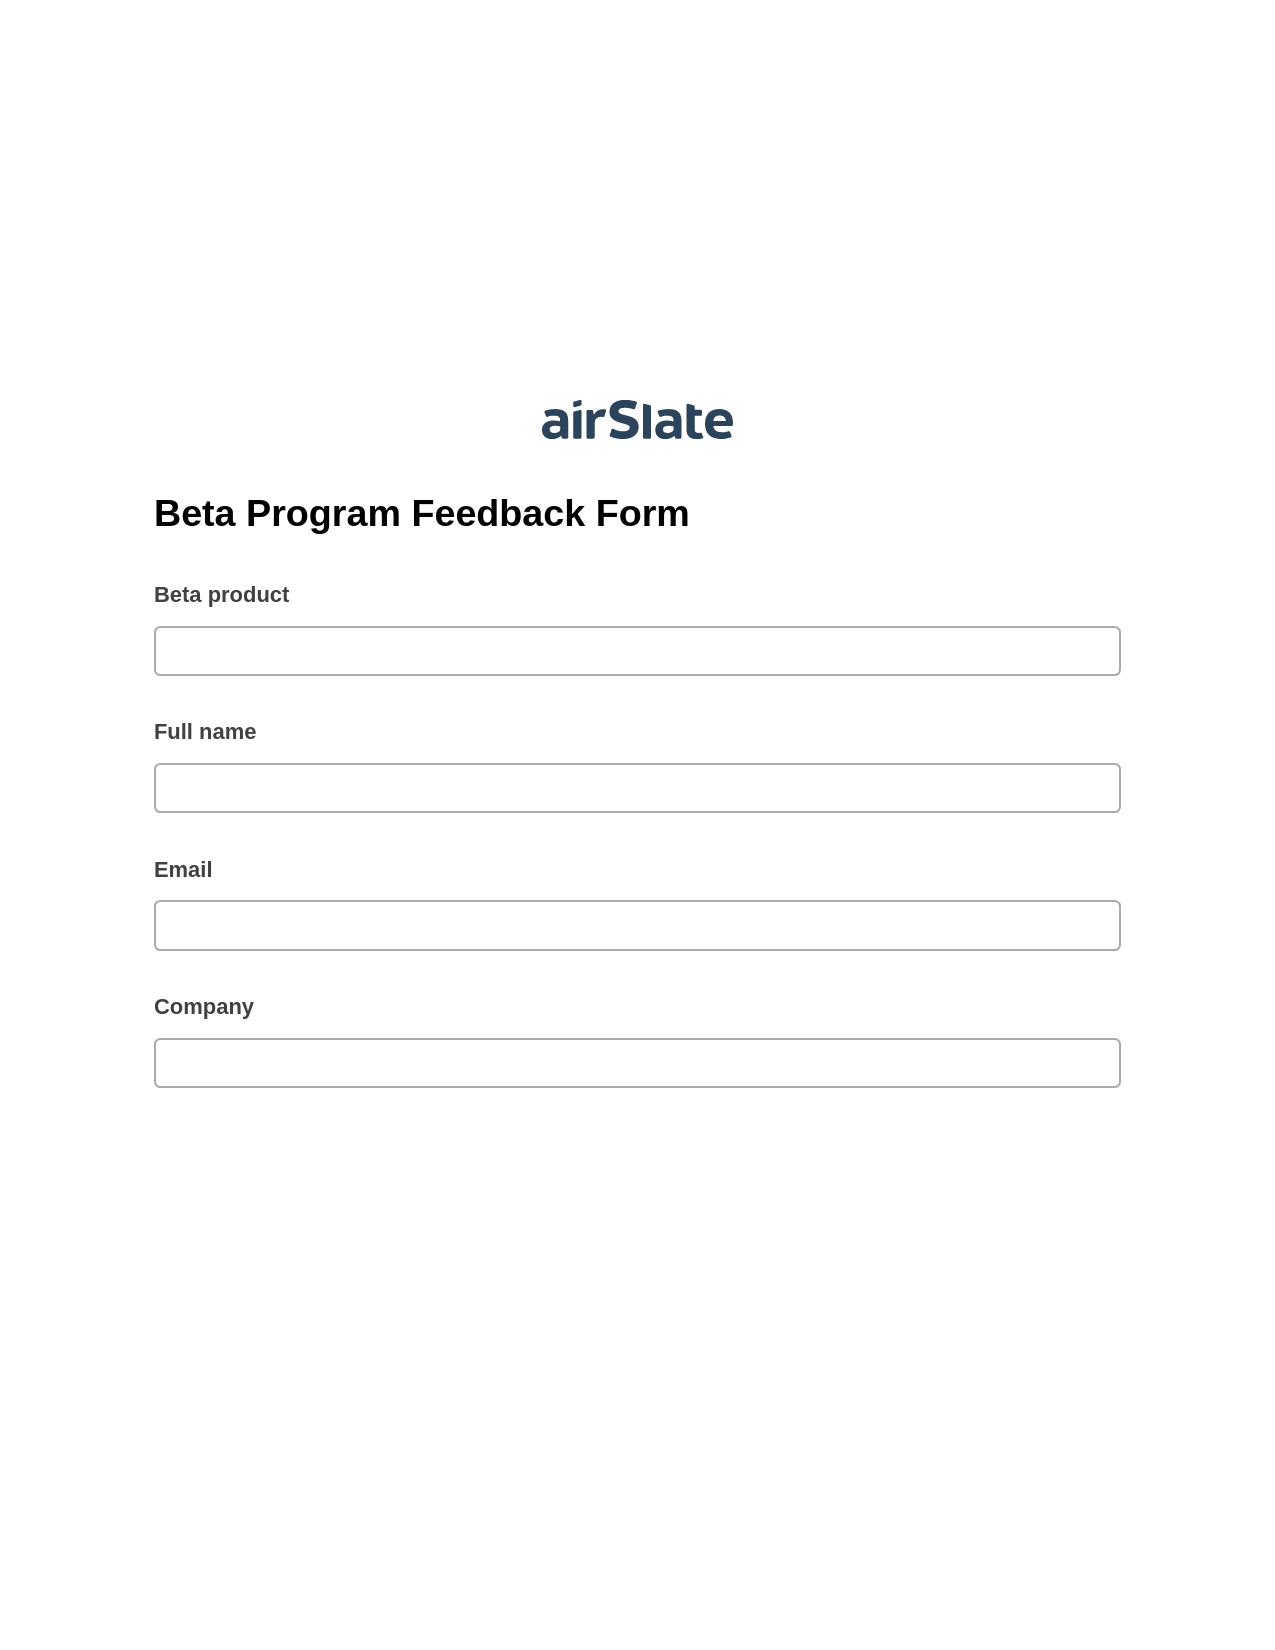 Multirole Beta Program Feedback Form Pre-fill Document Bot, Create Salesforce Record Bot, Export to Excel 365 Bot